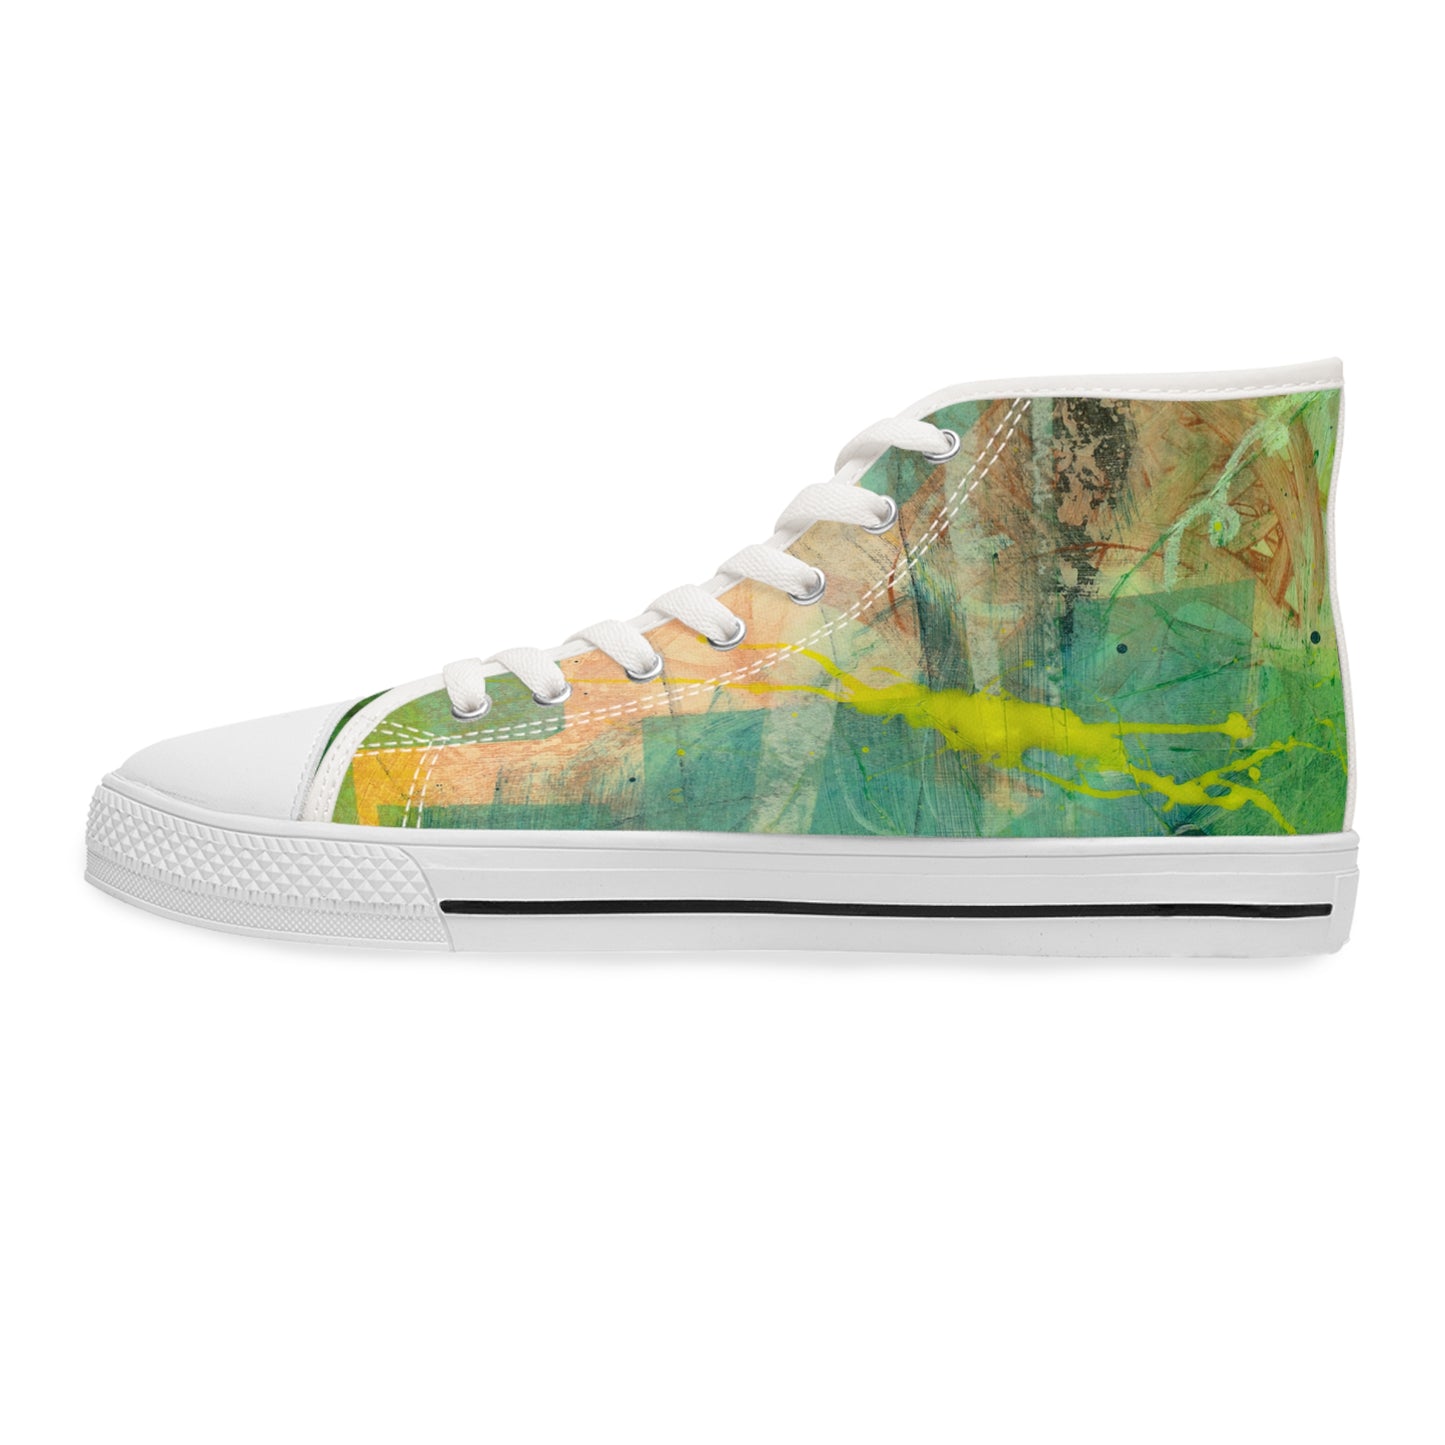 Women's High Top Sneakers - 02873 US 12 White sole